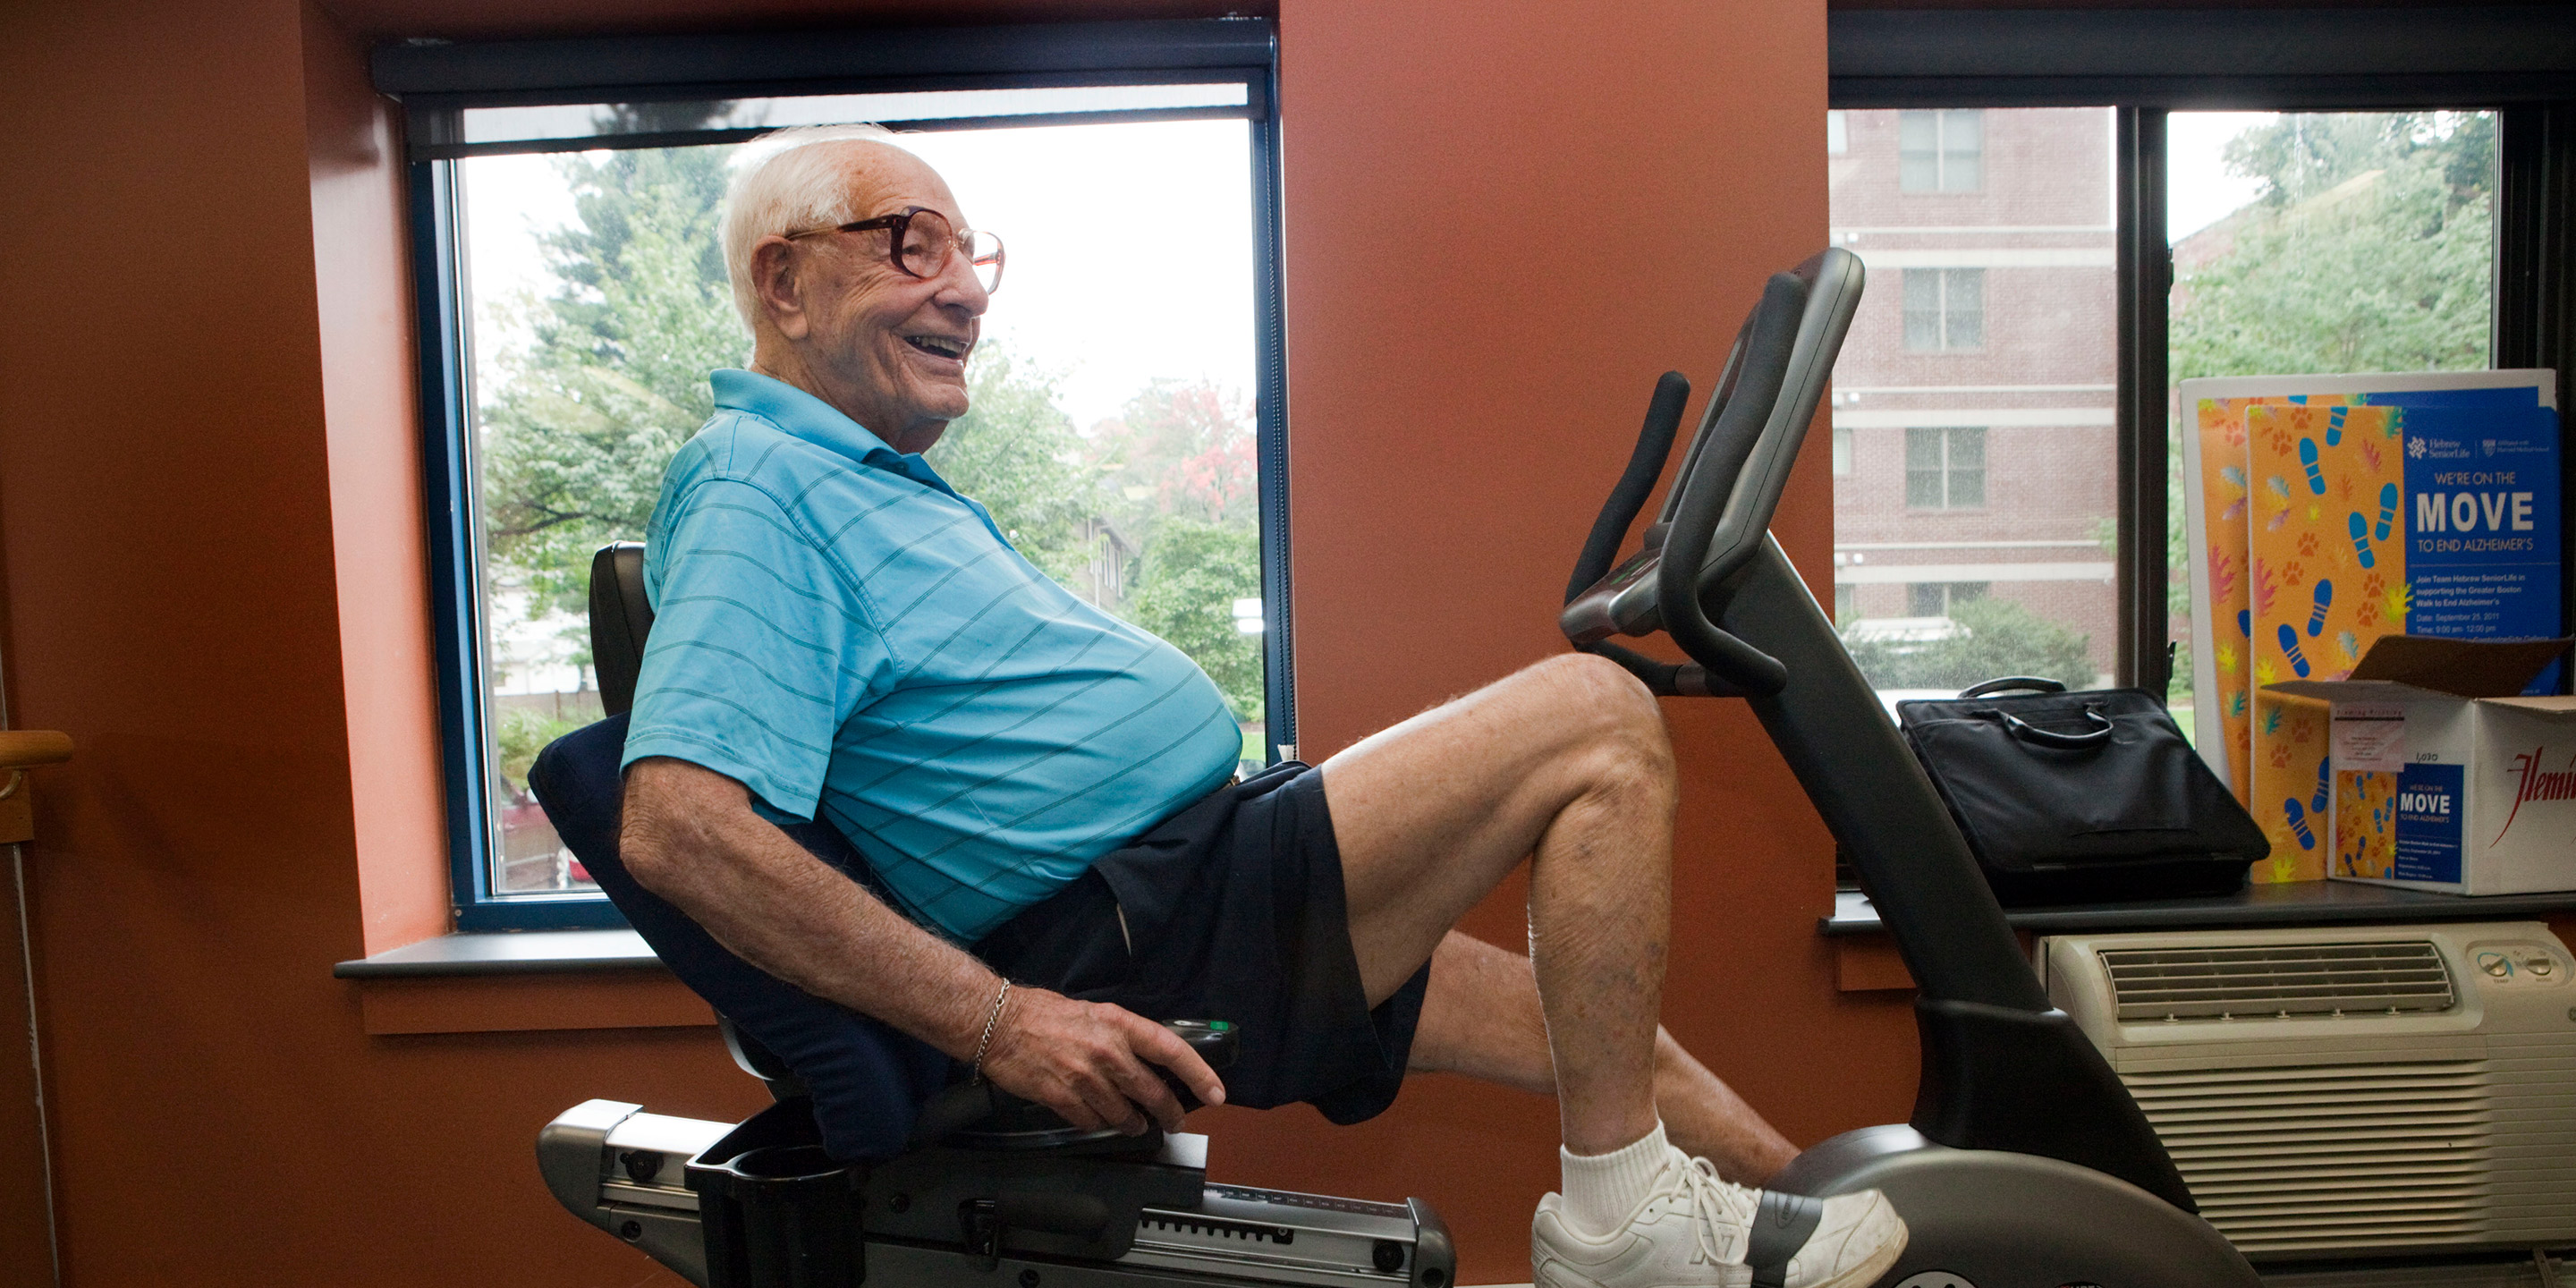 Male resident smiles while working out on a stationary bicycle in a gym 